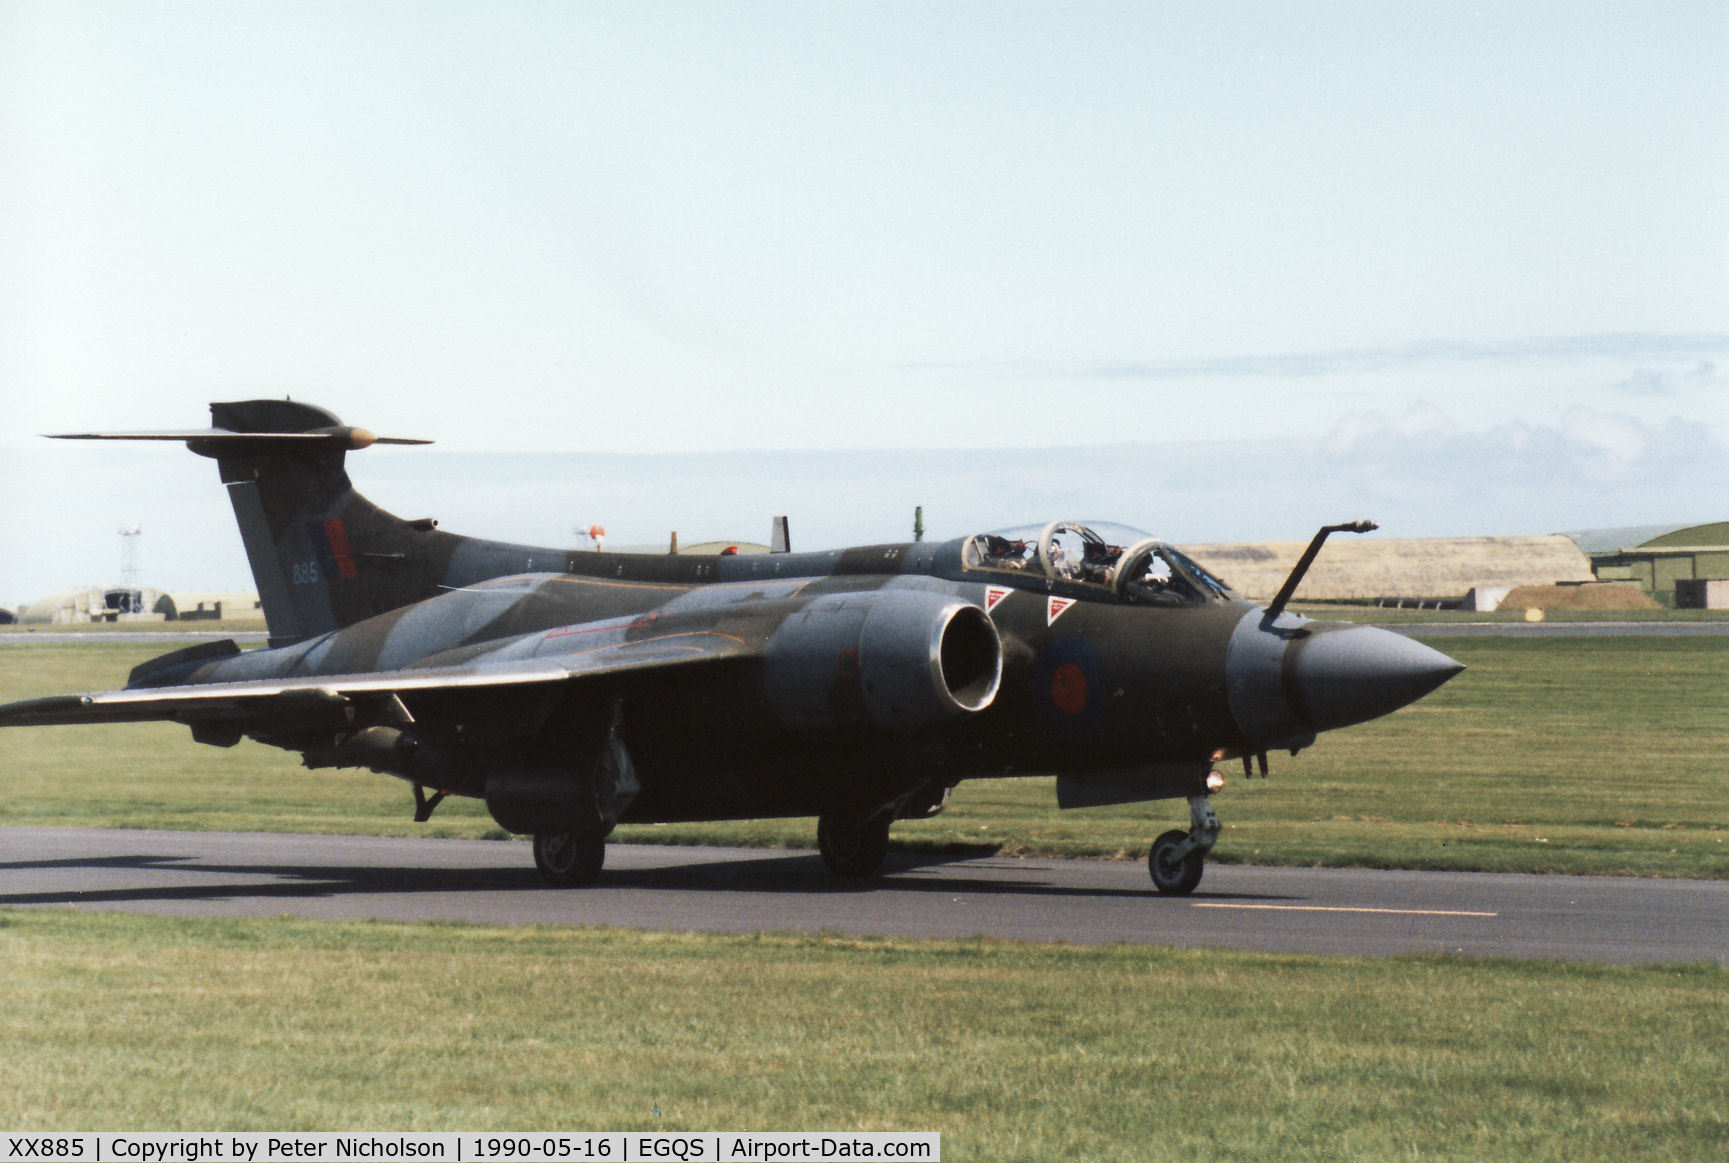 XX885, 1974 Hawker Siddeley Buccaneer S.2B C/N B3-01-73, Buccaneer S.2B of 12 Squadron taxying to the active runway at RAF Lossiemouth in May 1990.